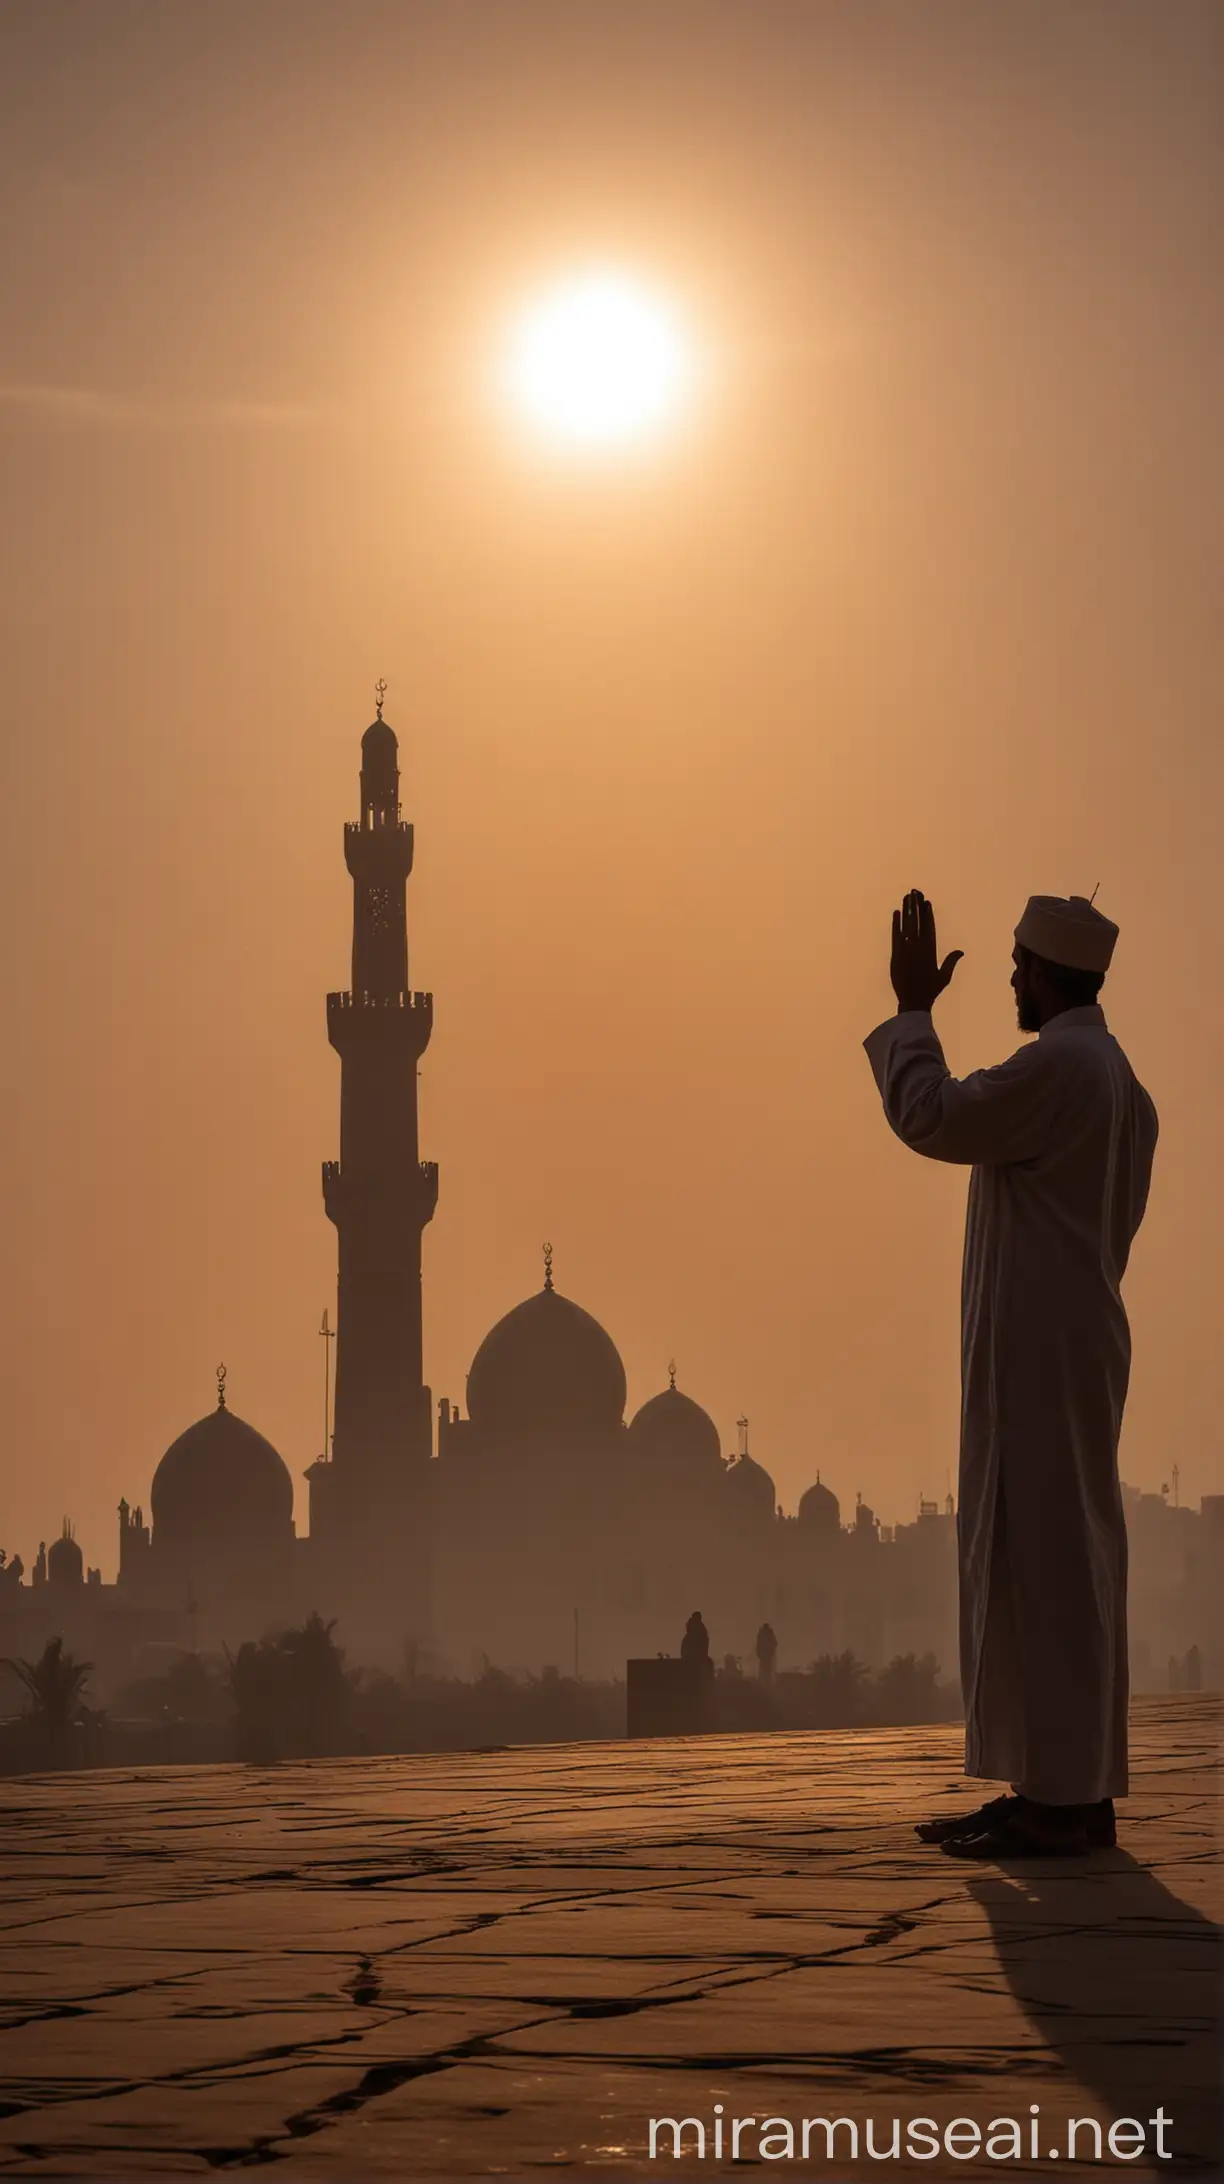 Mosque Silhouette at Sunset with Prayer Figure